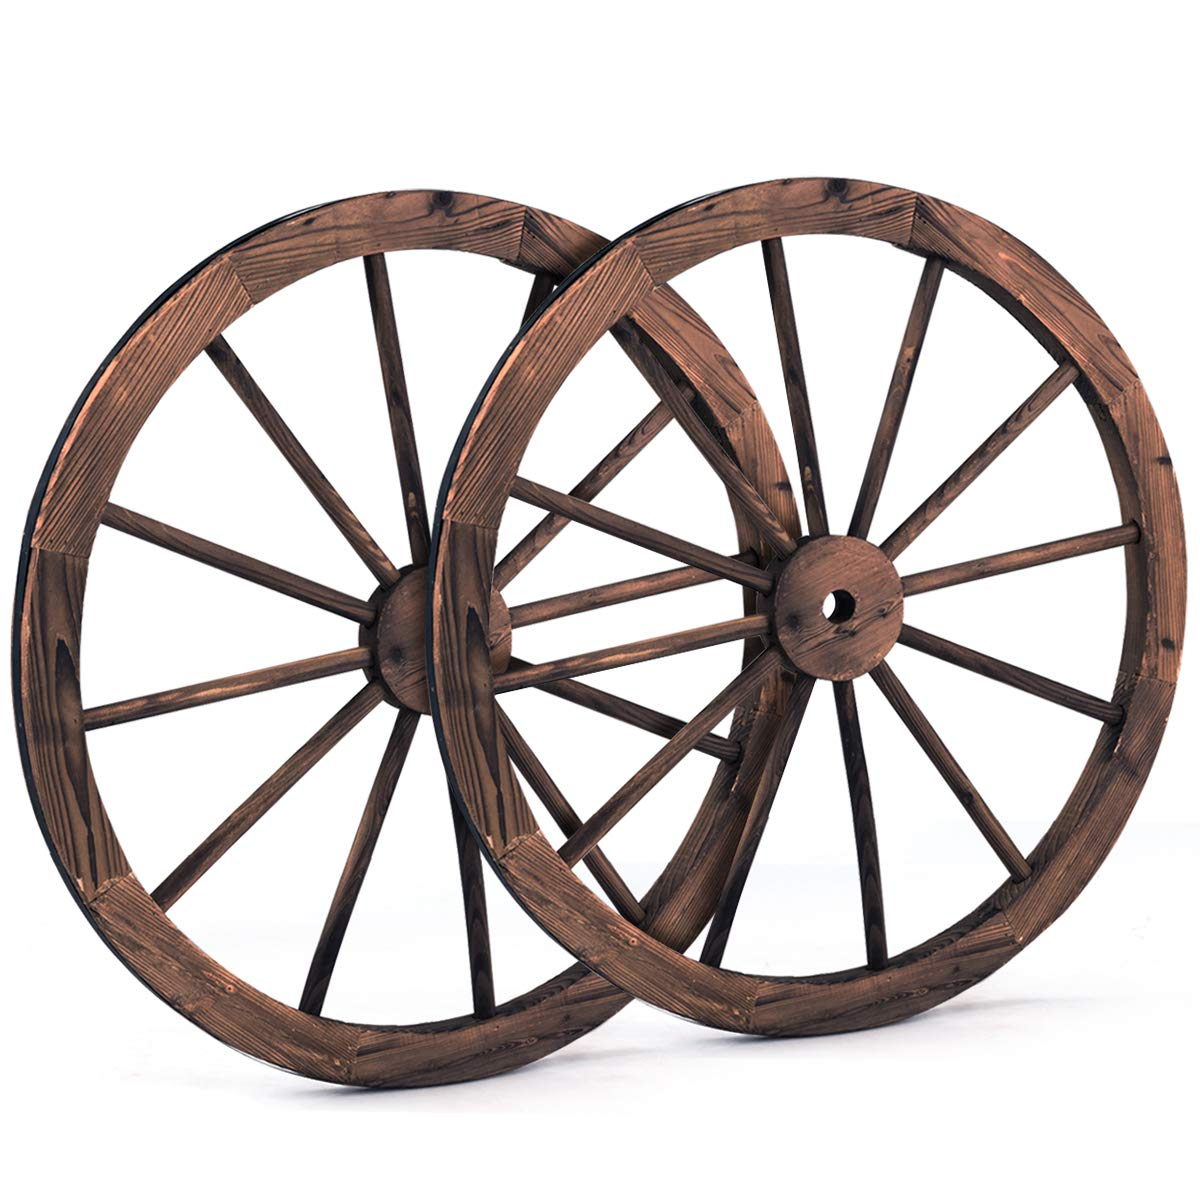 Giantex 30-Inch Set of Two Decorative Wooden Wheel